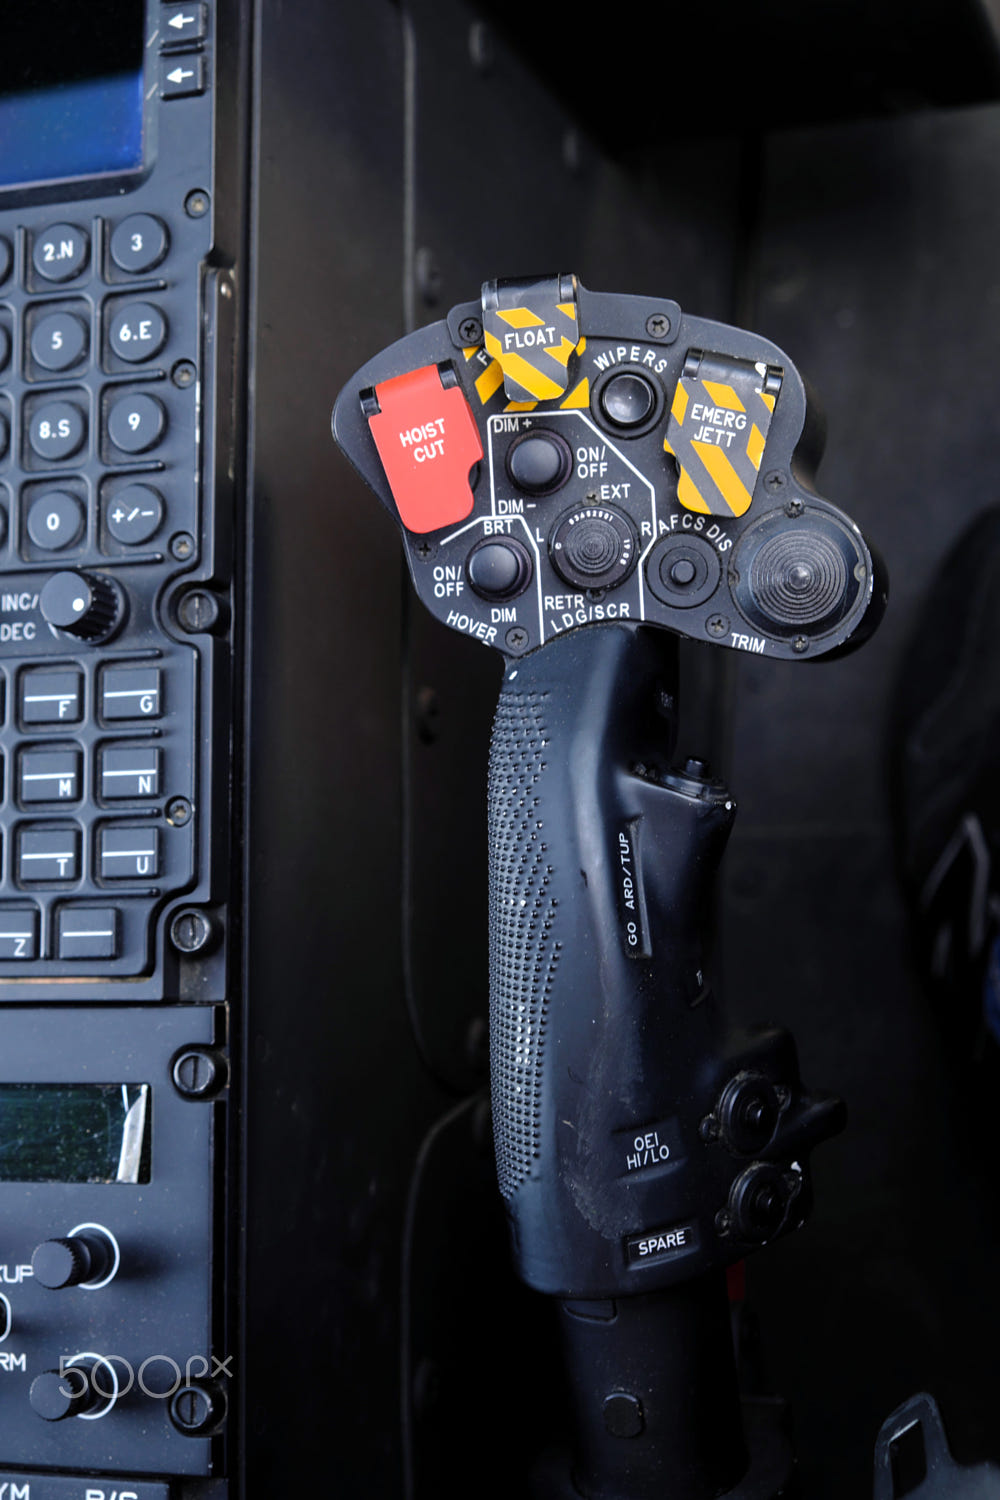 Joystick NH-90 Helicopter by Daniel Hellin on 500px.com